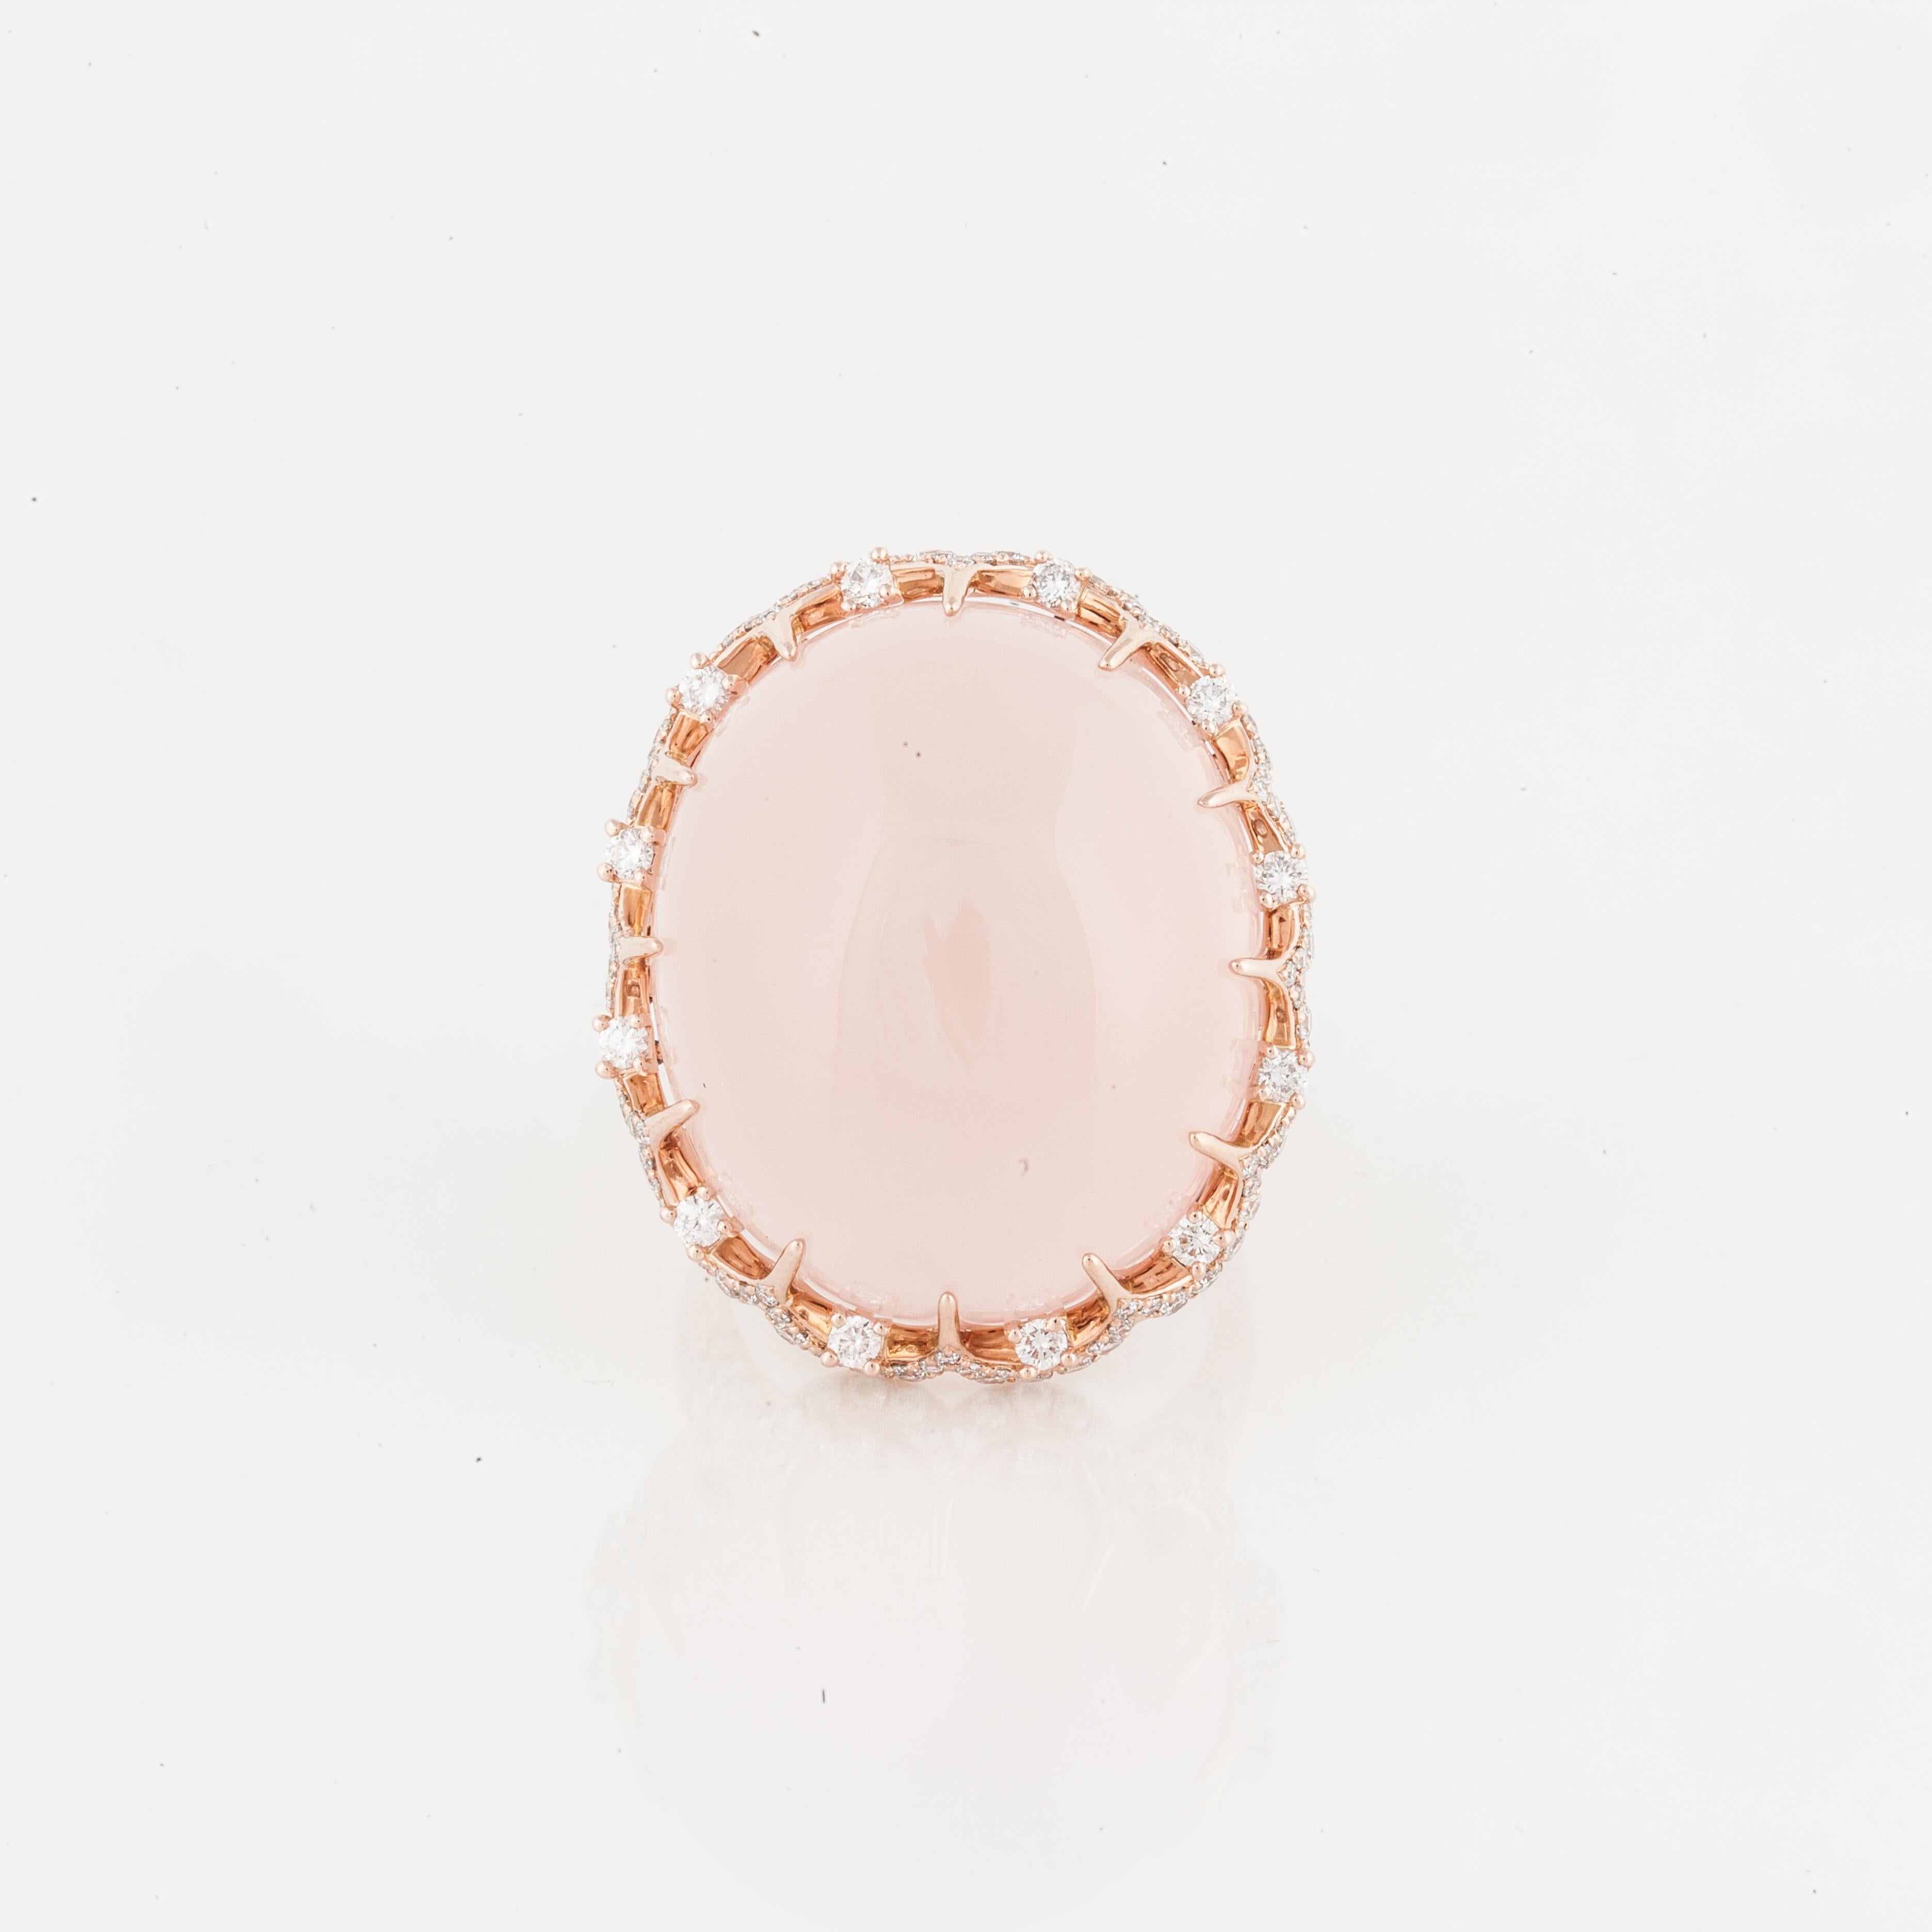 14K rose gold ring featuring a large cabochon rose quartz stone surrounded by diamonds.  There are 164 round diamonds that total 2.10 carats; G-I color and SI clarity.  The ring is currently a size 7.  Presentation area measures 1 inch by 1 1/8